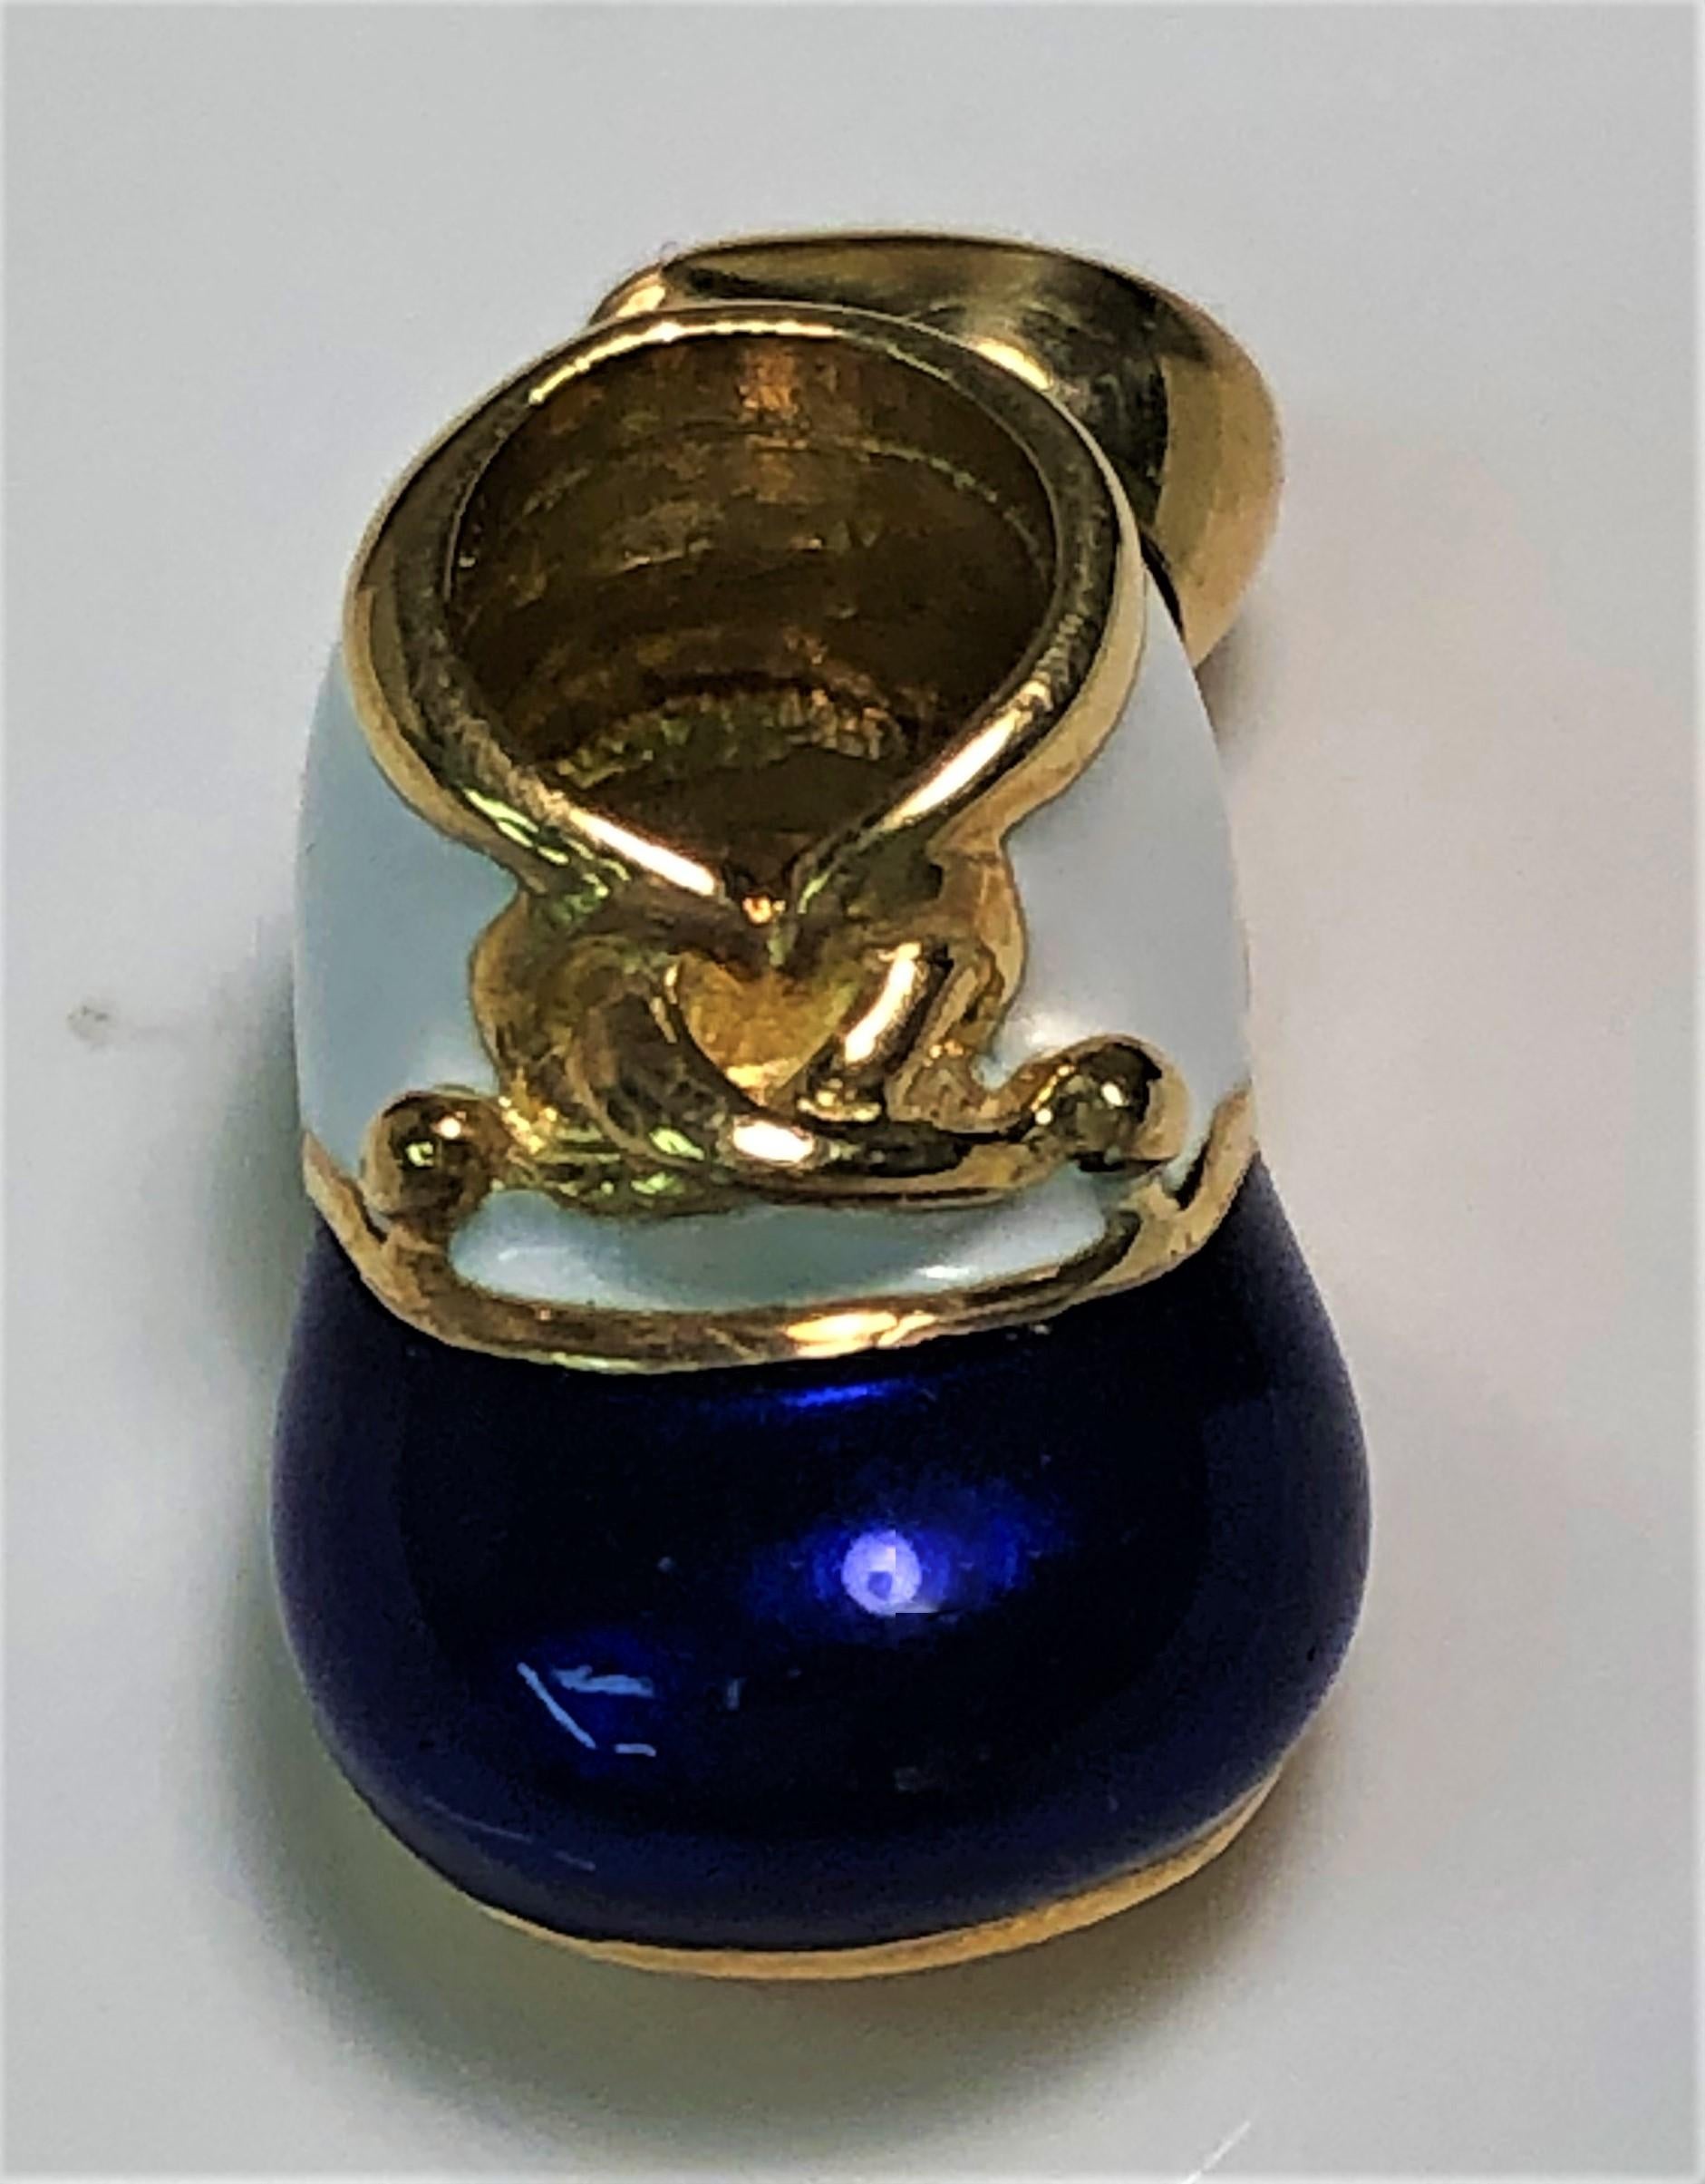 By designer Felix Vollman 
Detailed royal blue and white enamel.
18 karat yellow gold.
Bottom of the shoe can be engraved (not included in the price).
Can be worn as a pendant with a necklace and/or as a charm for a bracelet.
Just over 1